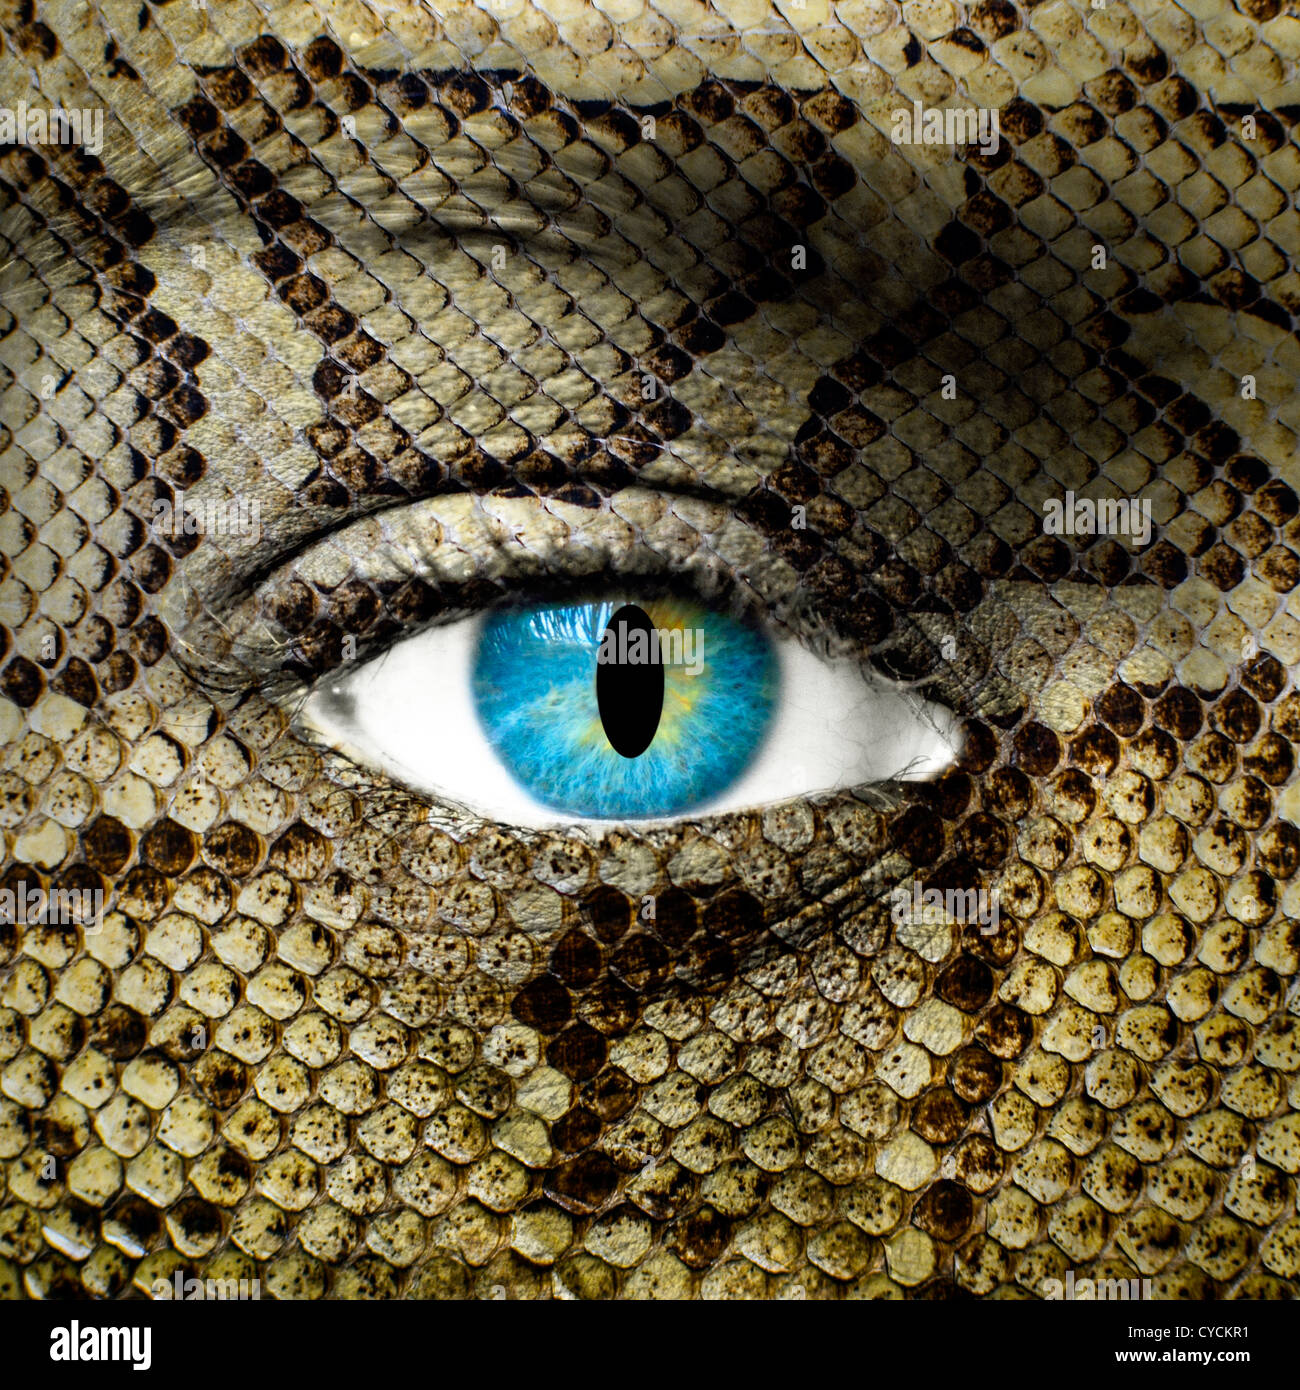 12,992 Snake Skin Texture Stock Photos - Free & Royalty-Free Stock Photos  from Dreamstime